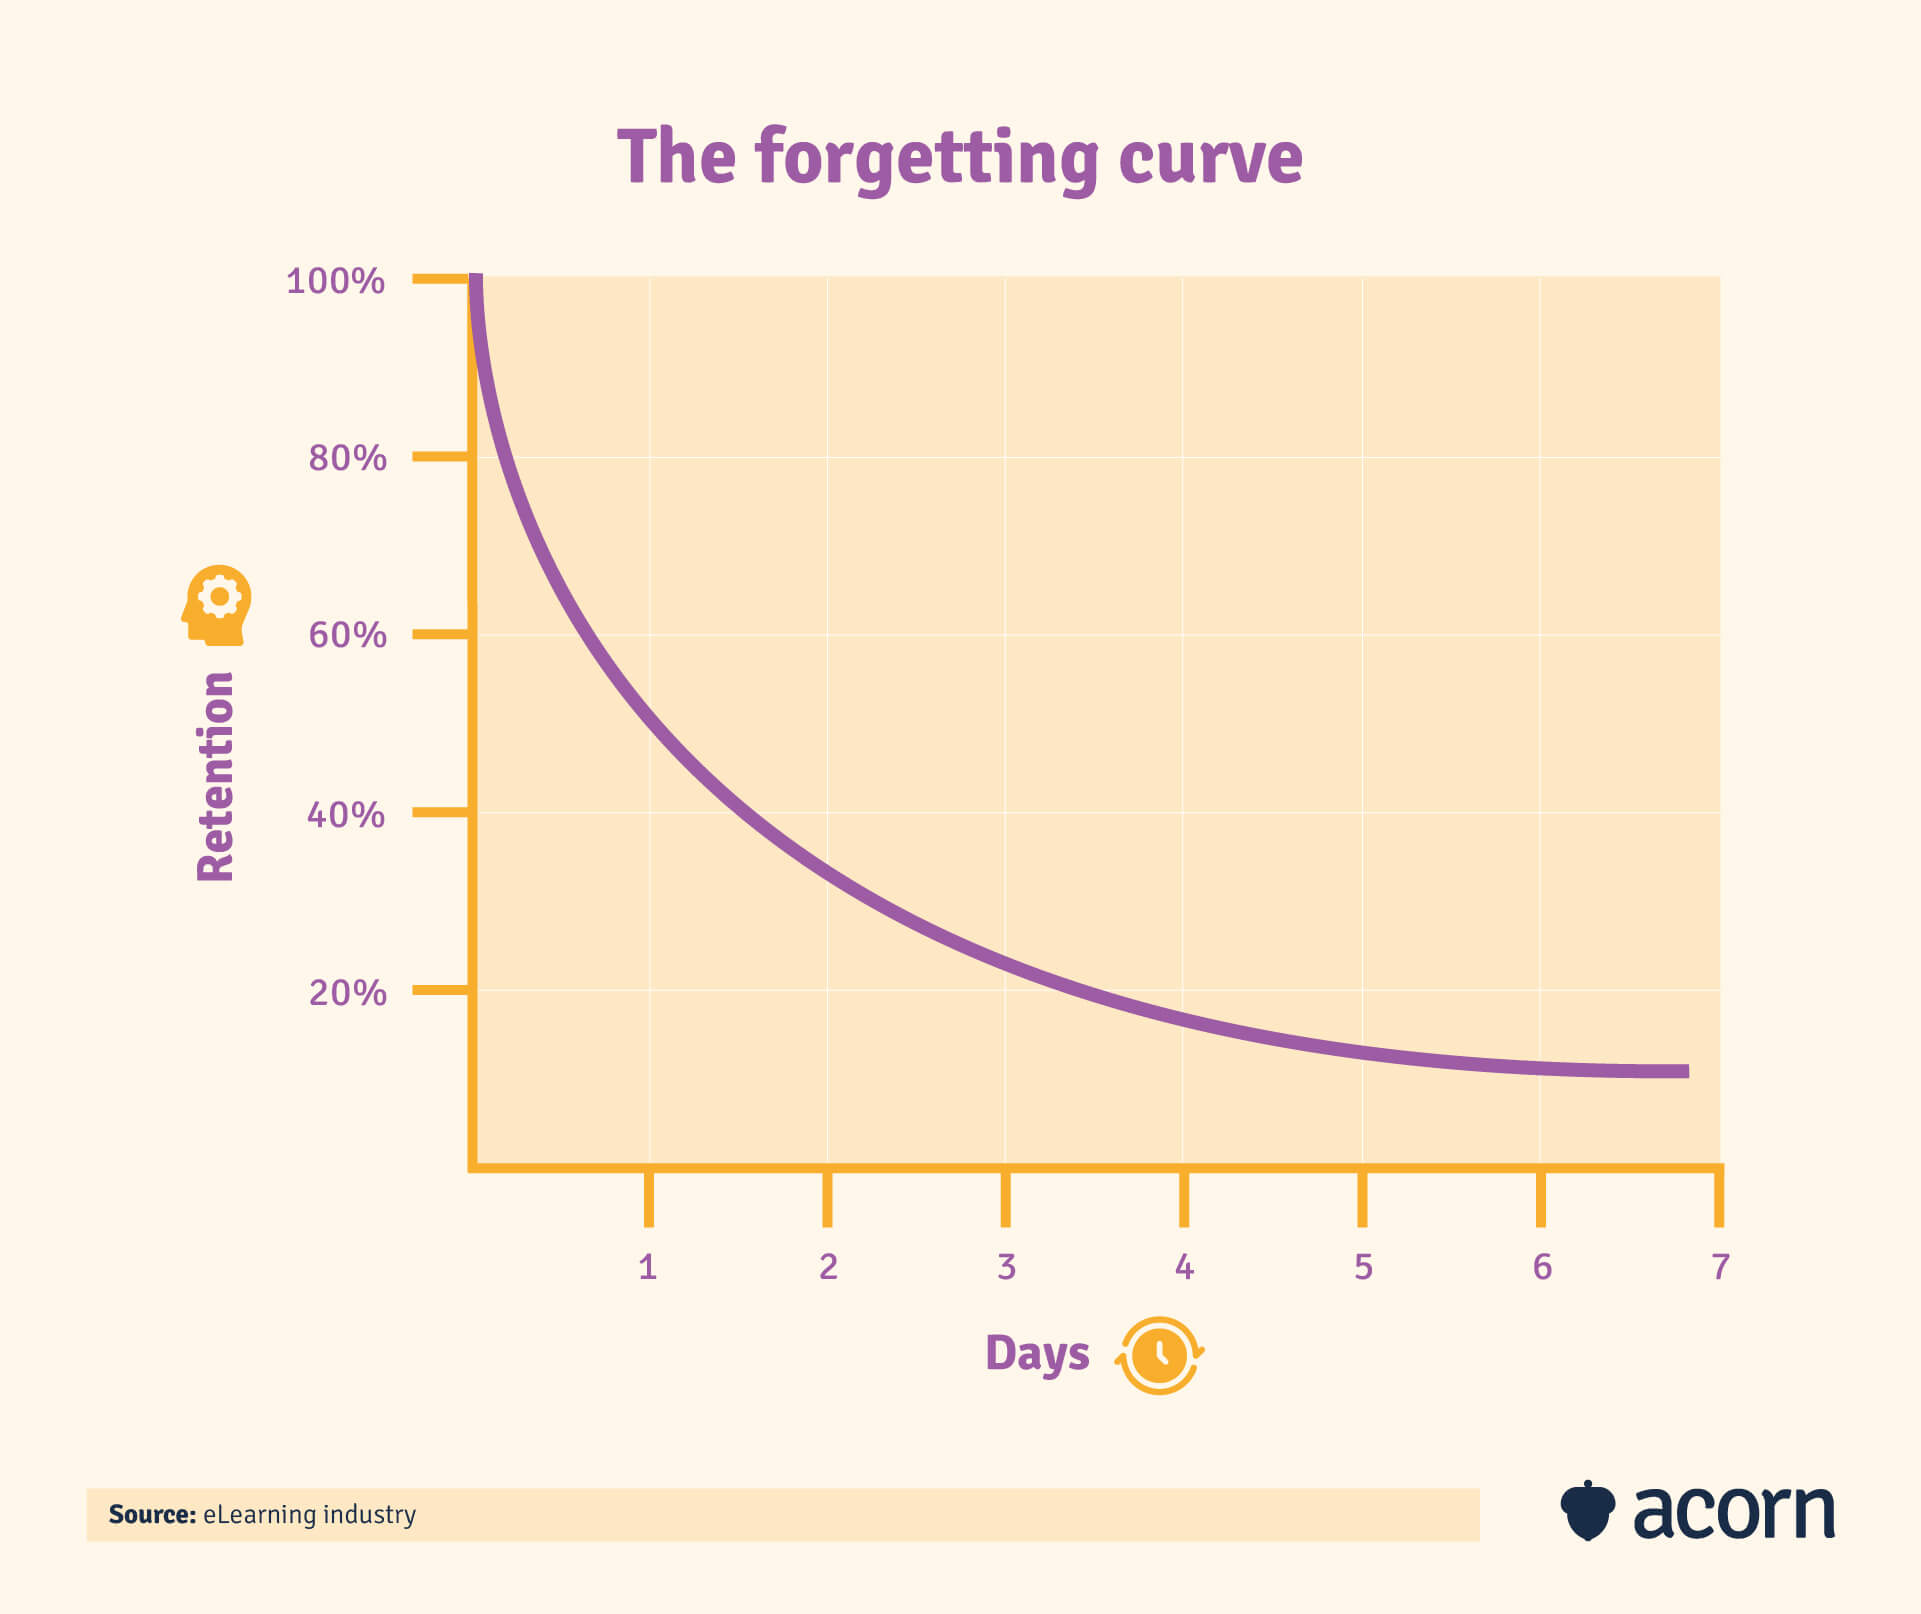 Ebbinghaus' forgetting curve of how knowledge is lost over time